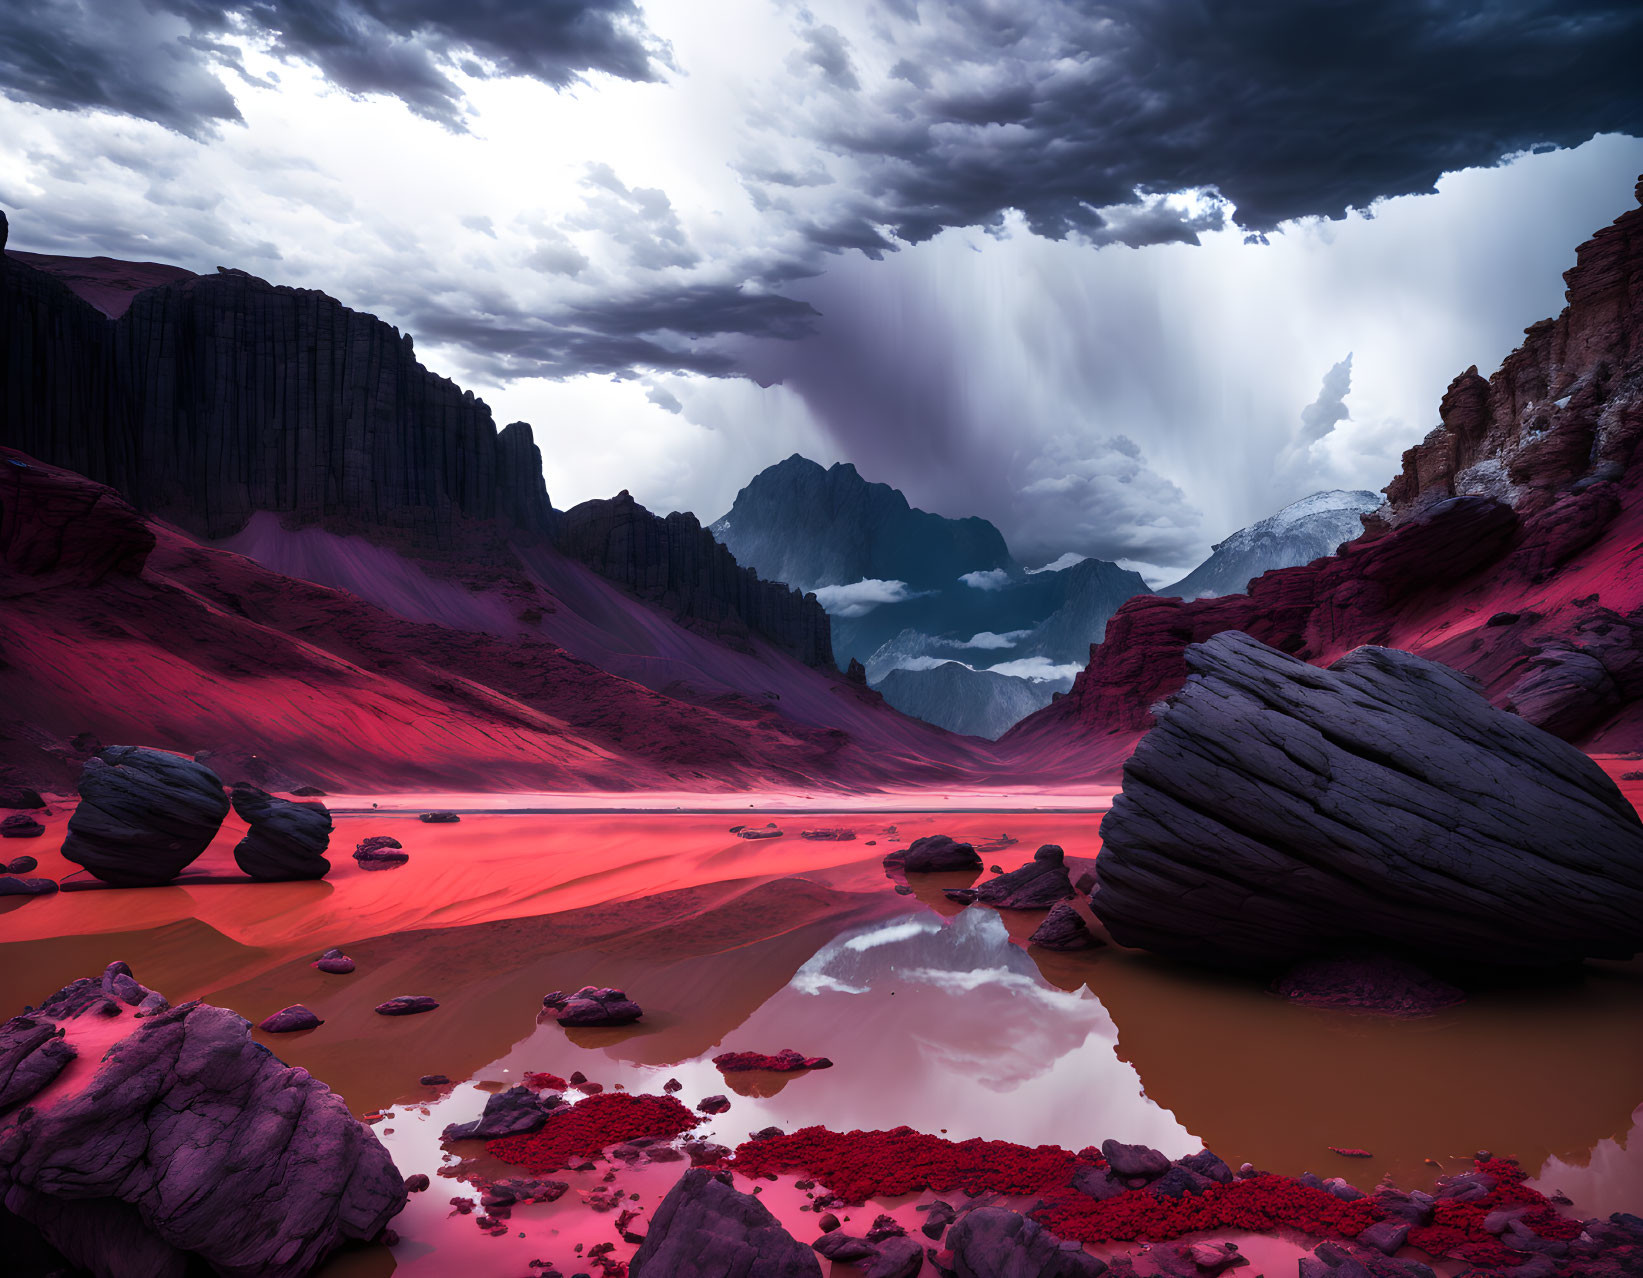 Dark stormy skies over red riverbed and mountains.